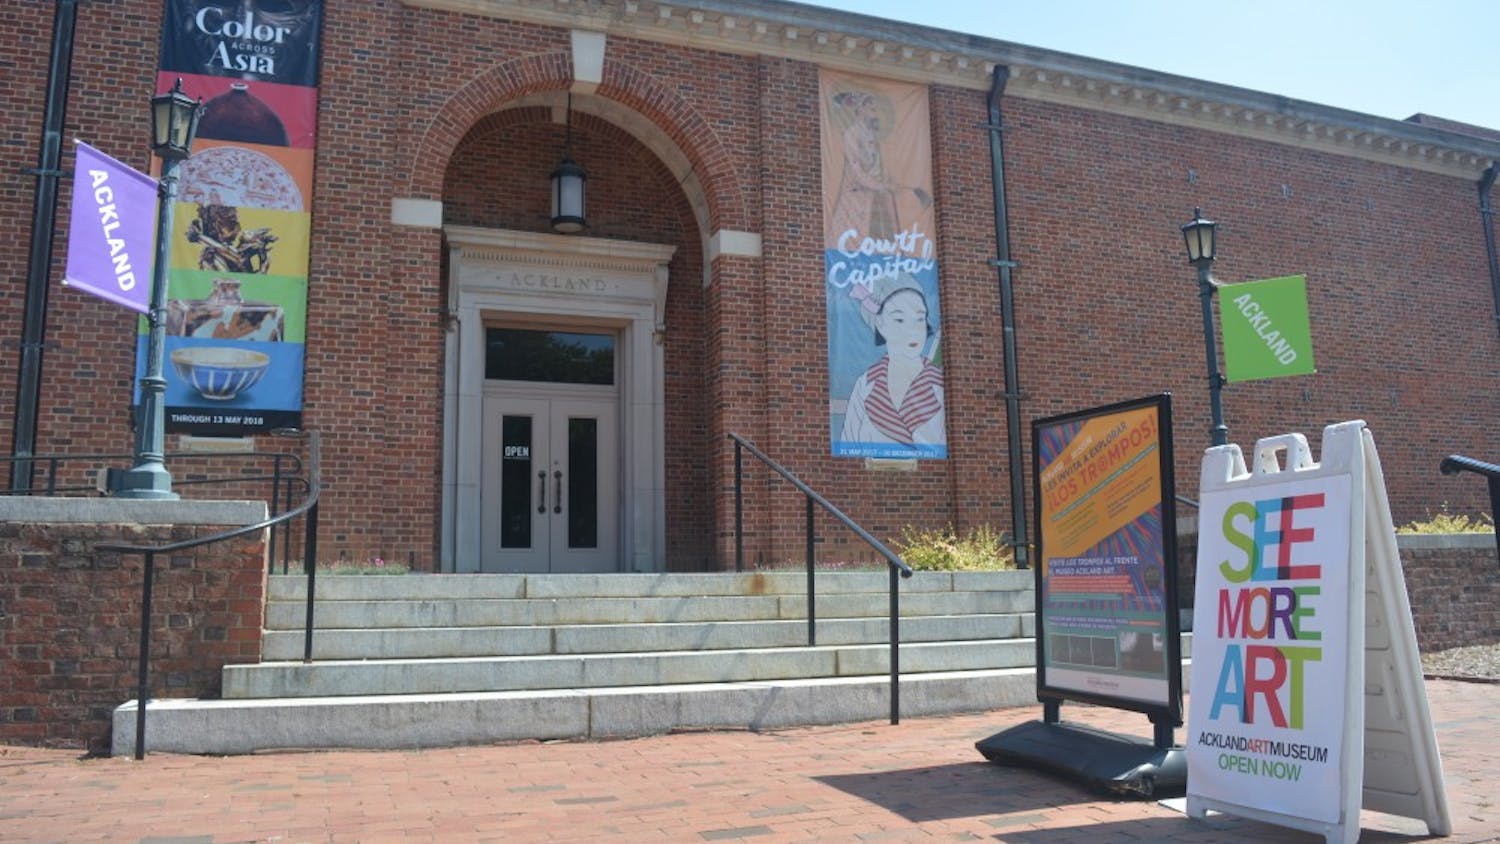 The Ackland Art Museum is a museum and academic unit of The University of North Carolina at Chapel Hill located on S Columbia Street. Photo courtesy of Molly Sprecher.&nbsp;